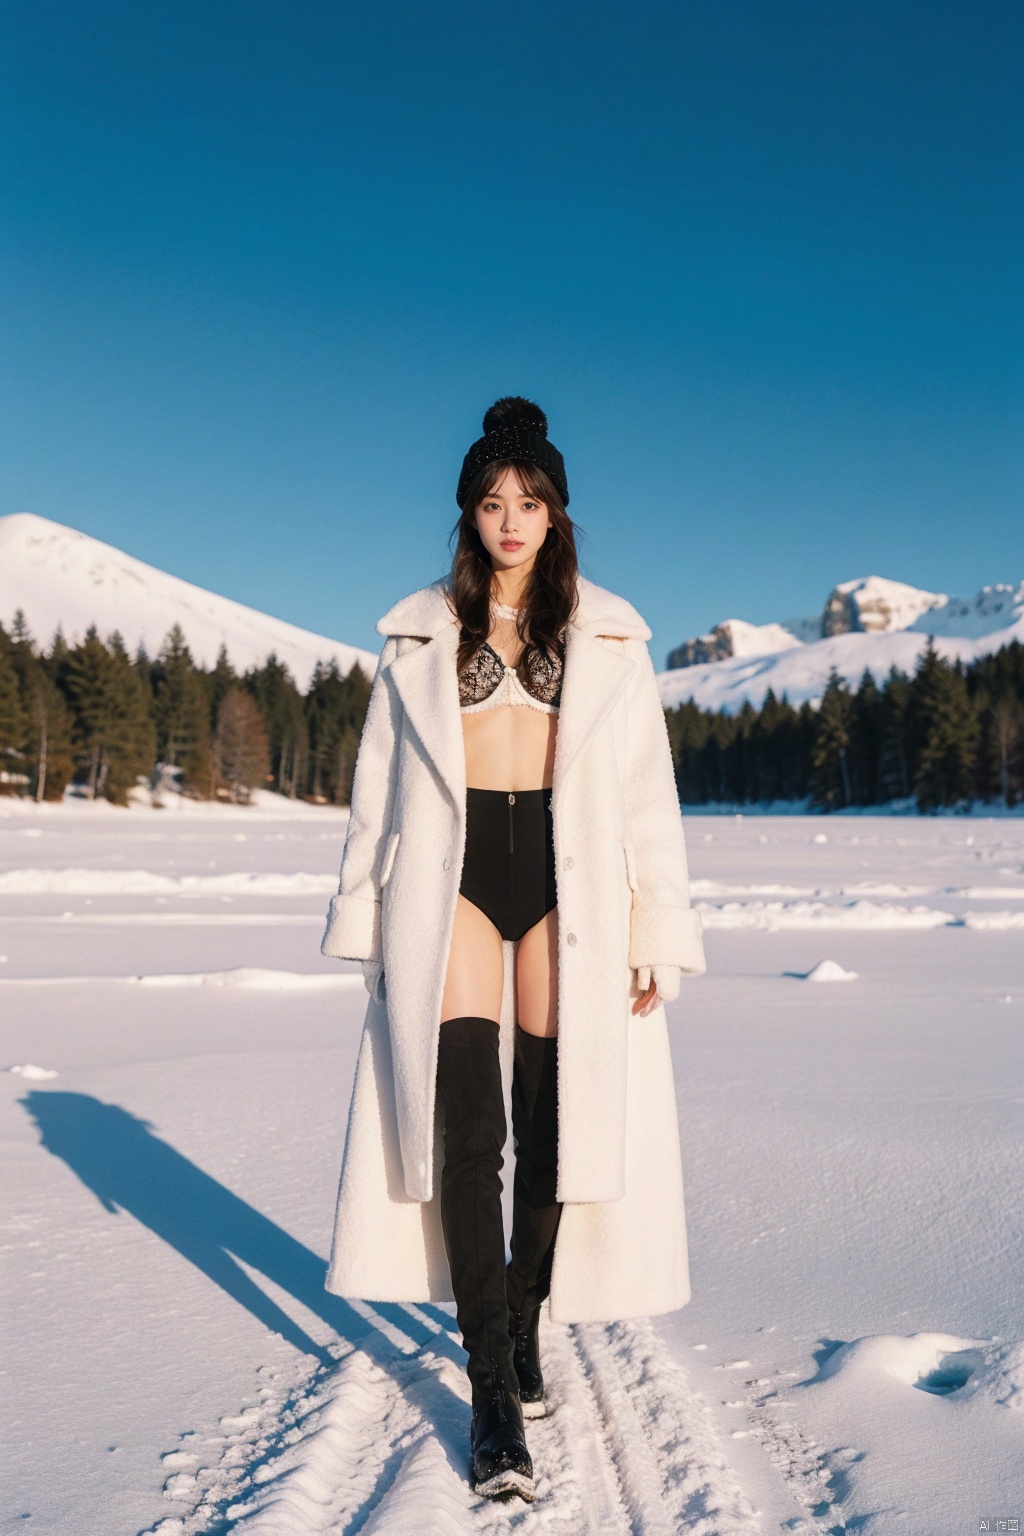  Girl in winter wonderland, panoramic view, standing on the edge of a frozen lake, wearing a fur-edged long down jacket, ((opens the coat to reveal underwear and bra, paired with pantyhose))), snow boots, gloves, wool hat, surrounded by tall pine trees dusted with snow, a crisp blue sky with sunlight breaking through the clouds, casting elongated shadows, snowdrifts on the lake shore, distant mountains under the pink alpenglow, capturing the season of peace and tranquility